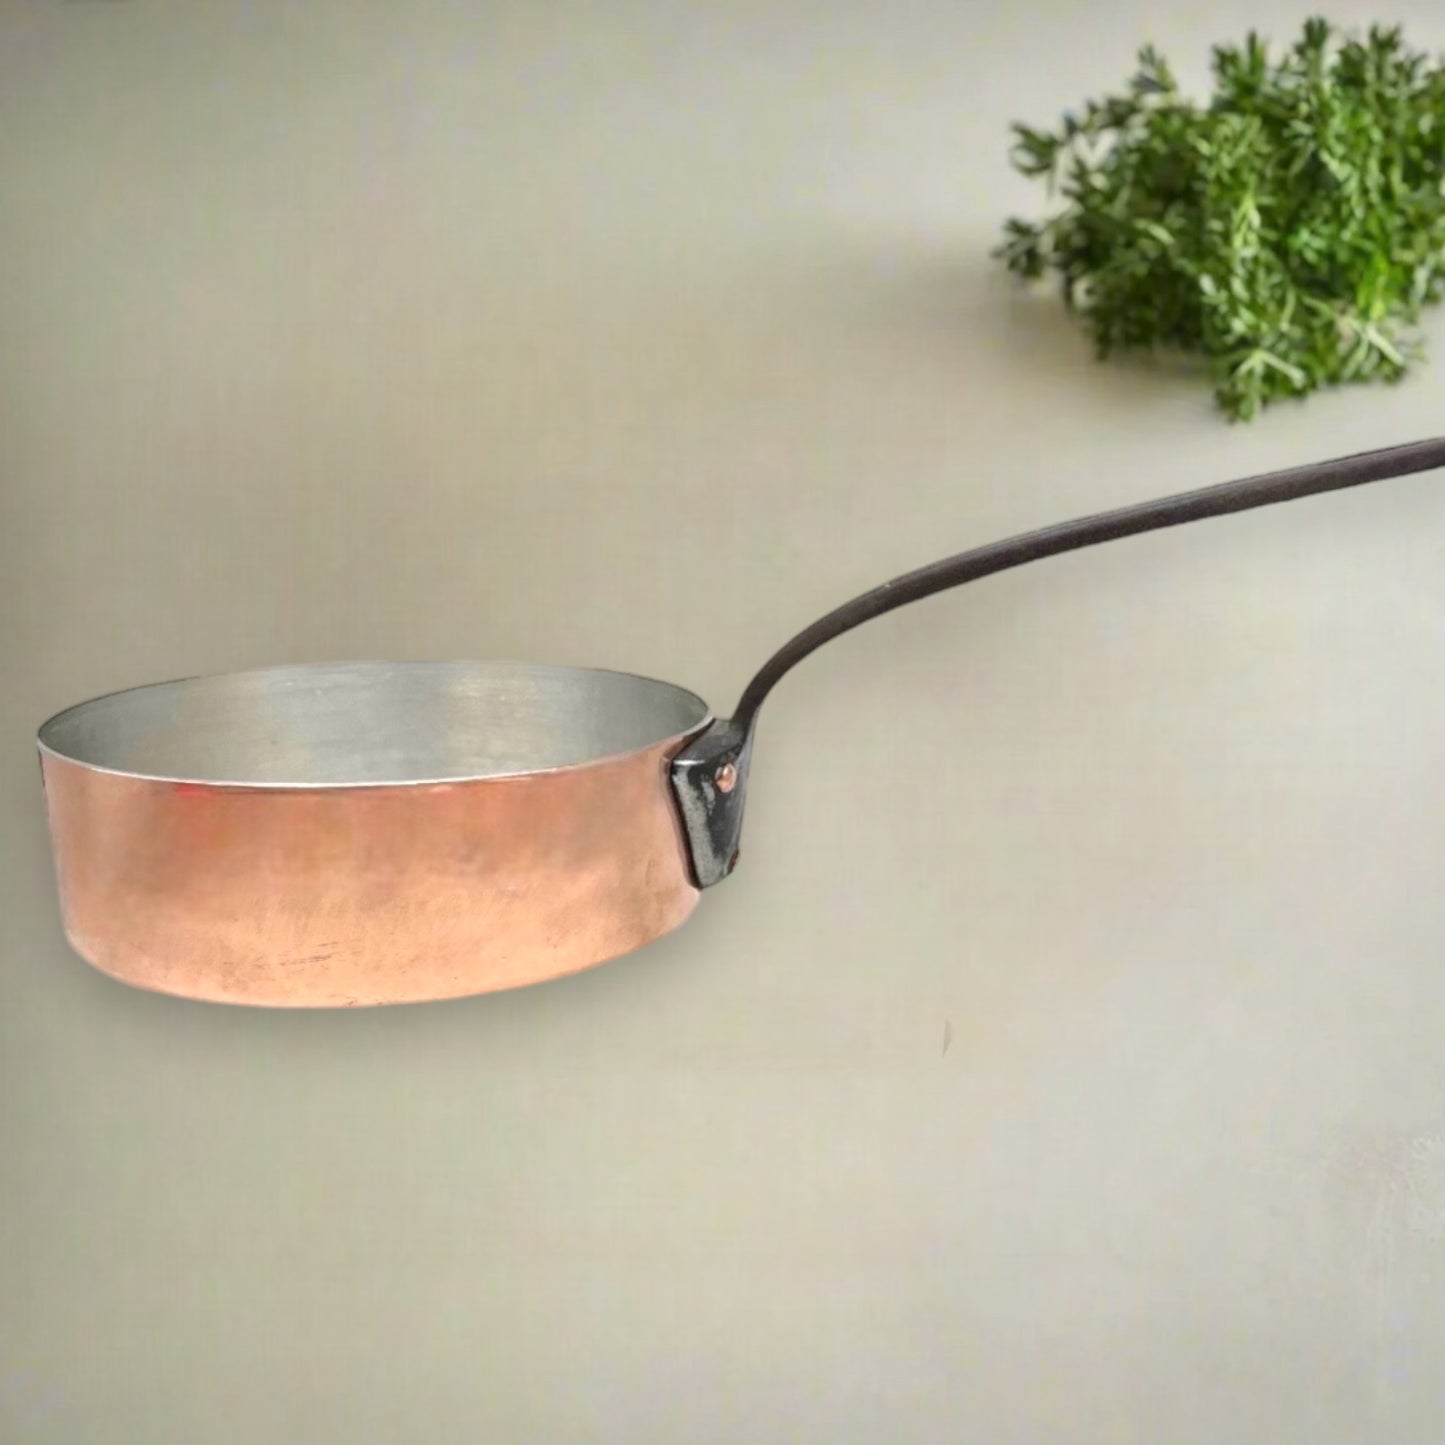 French Vintage Copper Frying Pan, 2mm Copper Saute, Brand New Tin Lining (A64)